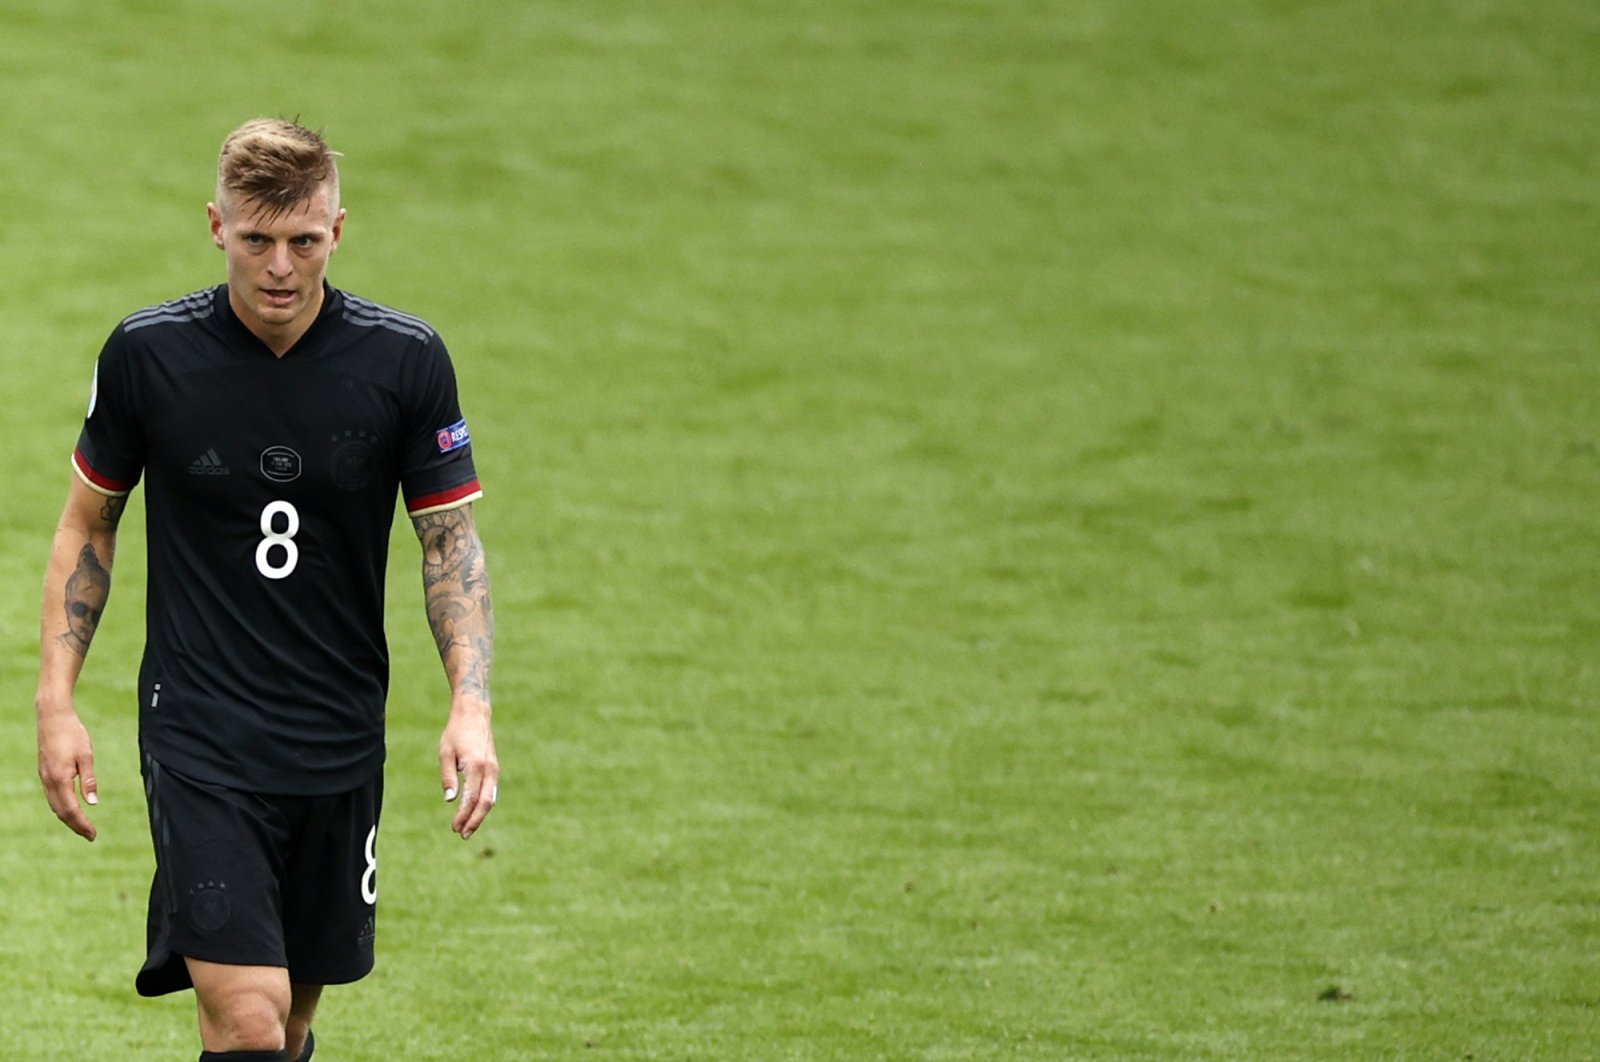 Germany's Toni Kroos leaves the pitch at halftime during the Euro 2020 football match round of 16 between England and Germany at Wembley stadium in London, U.K., June 29, 2021. (Pool via AP)